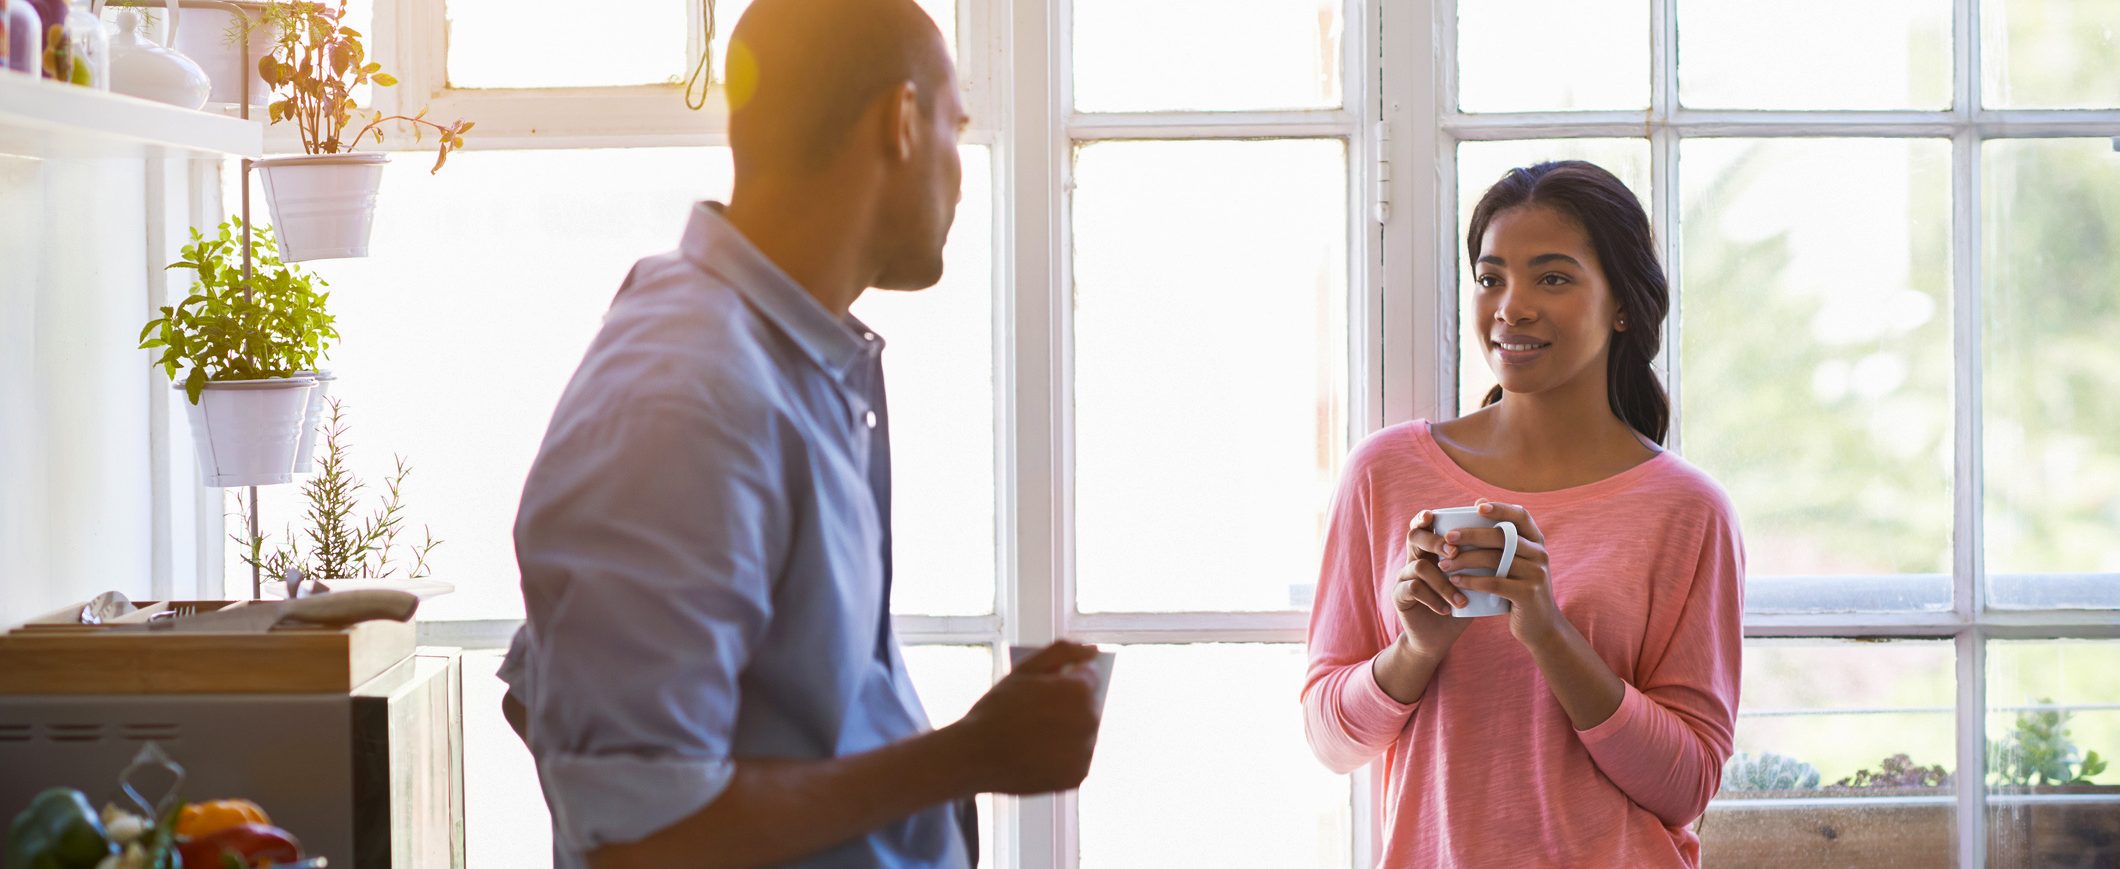 A couple holding coffee mugs looks at each other in front of the windows inside a home.